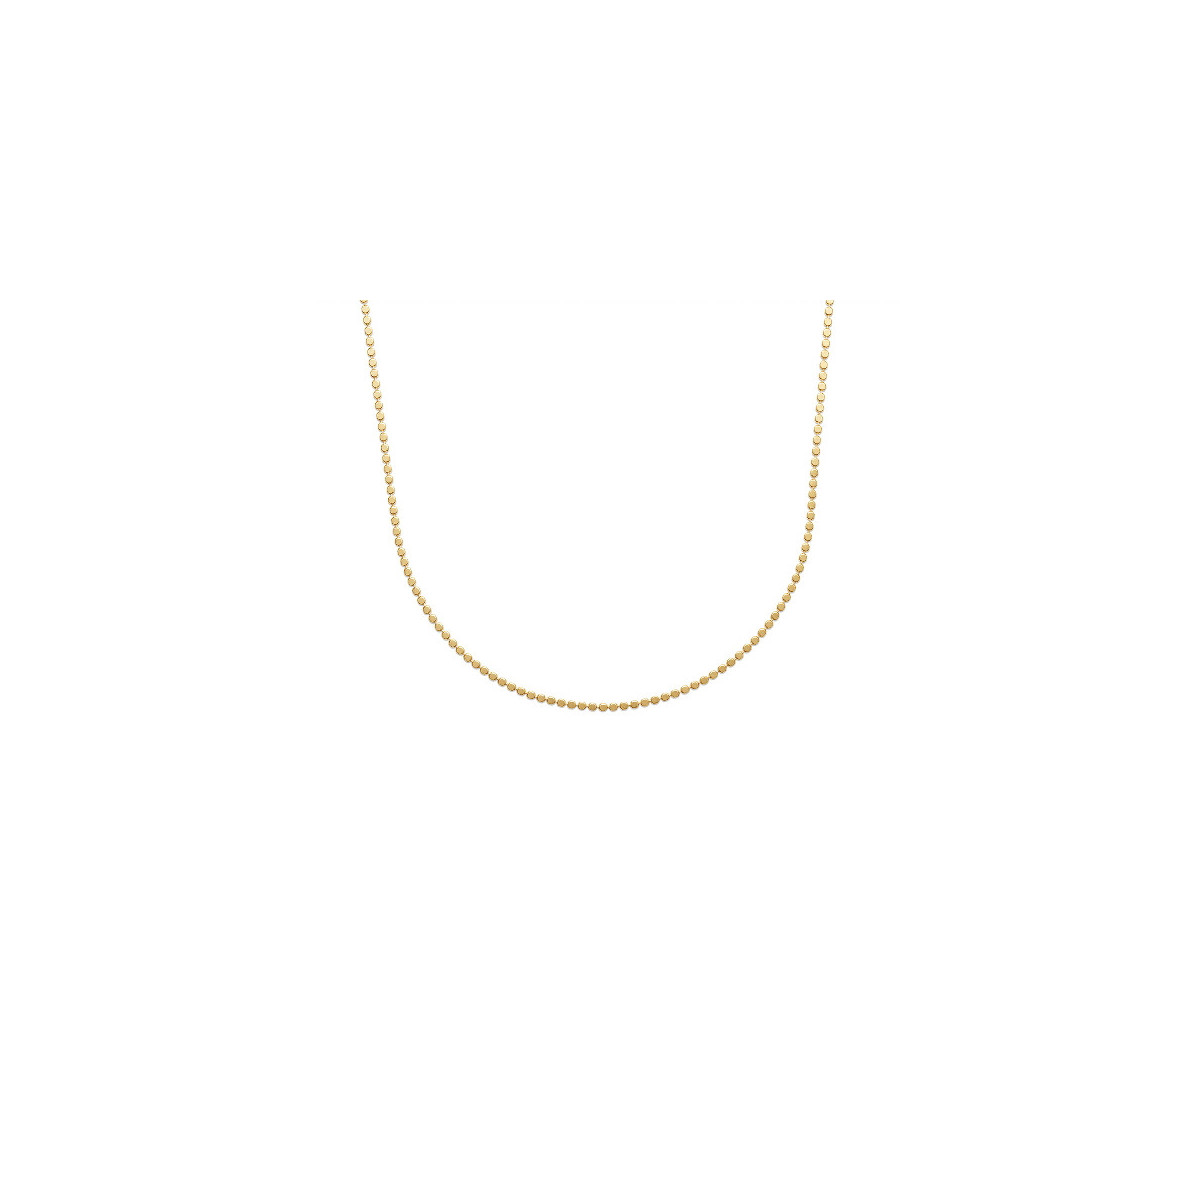 GOLD PLATED SILVER FLAT BEADS CHAIN